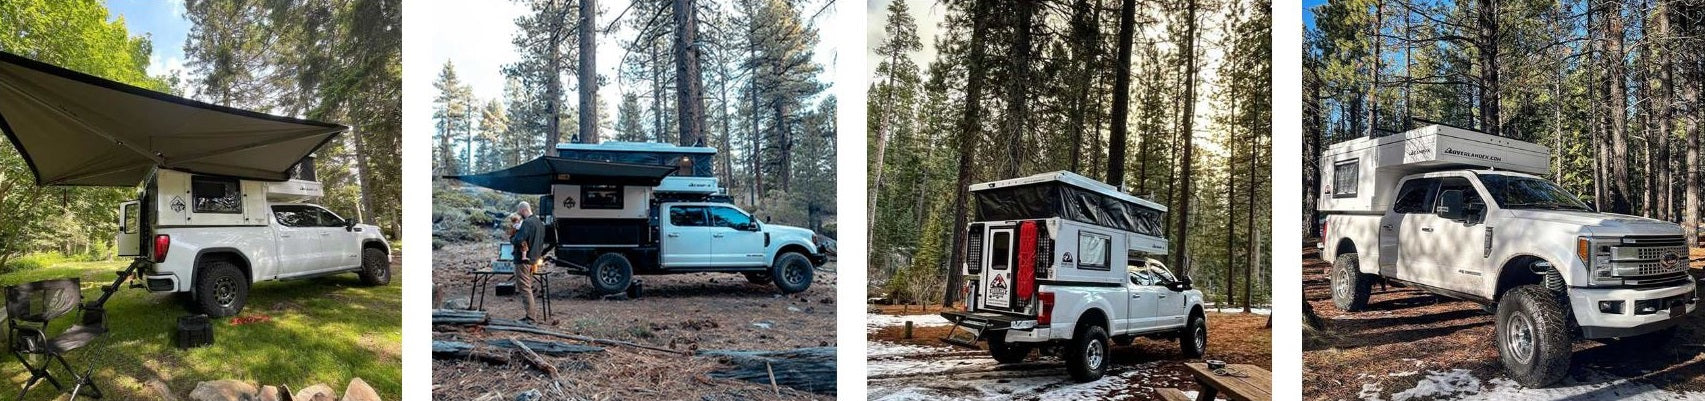 Six Features That Make A Slide In Camper The Ultimate Overlanding Option